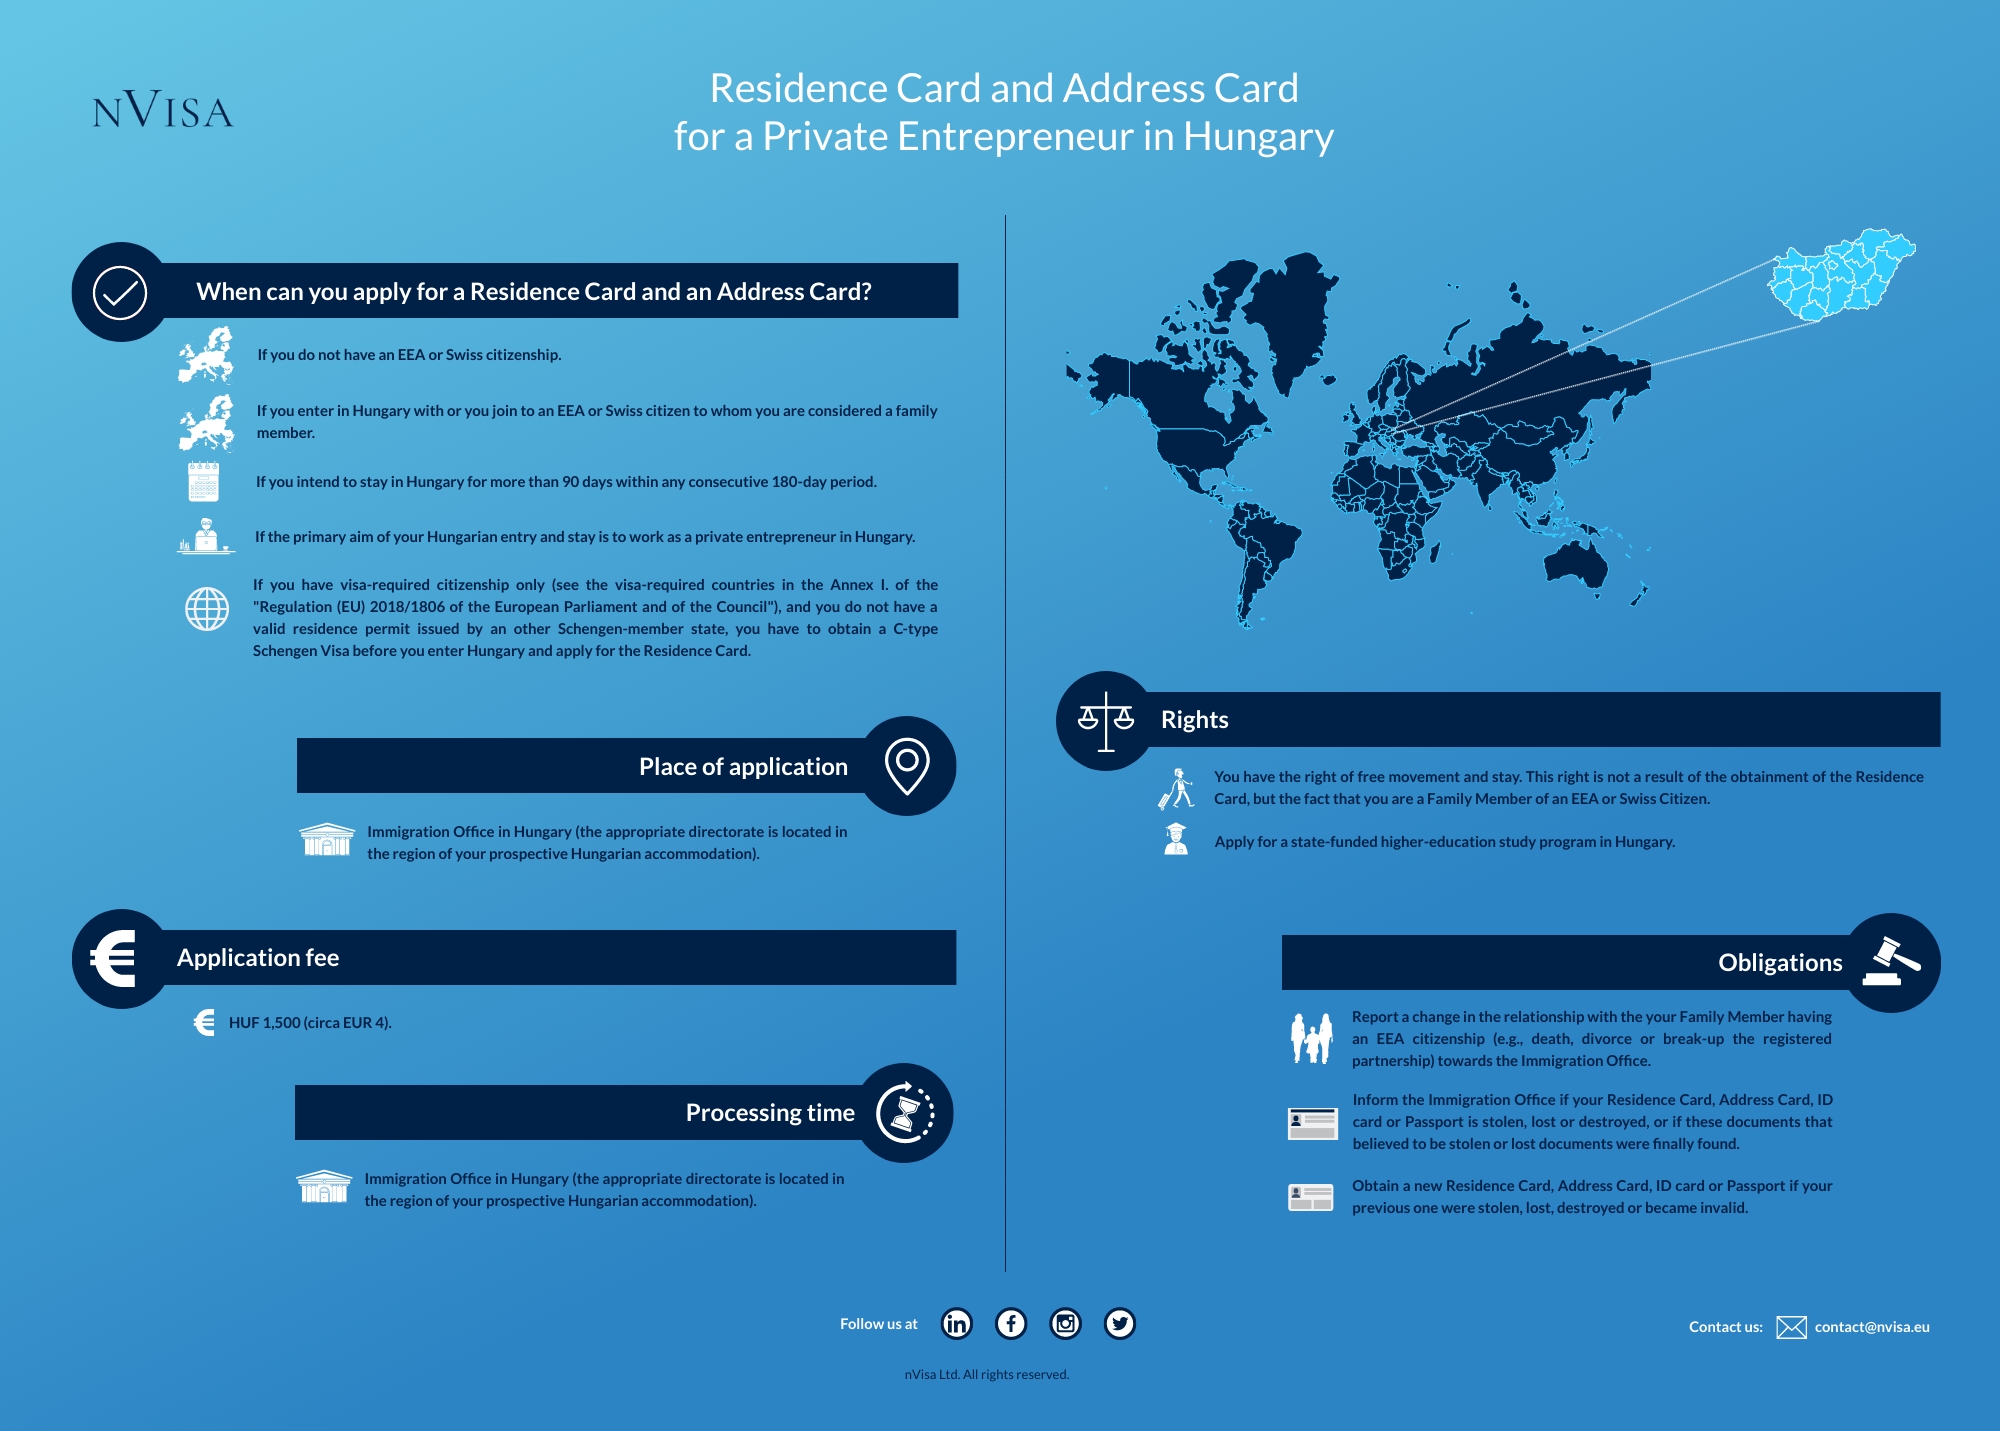 Infographic about immigration requirements and the details of obtaining a Hungarian Residence Card and Address Card for a third-country national Private Entrepreneur, who is a Family Member of an EEA Citizen.